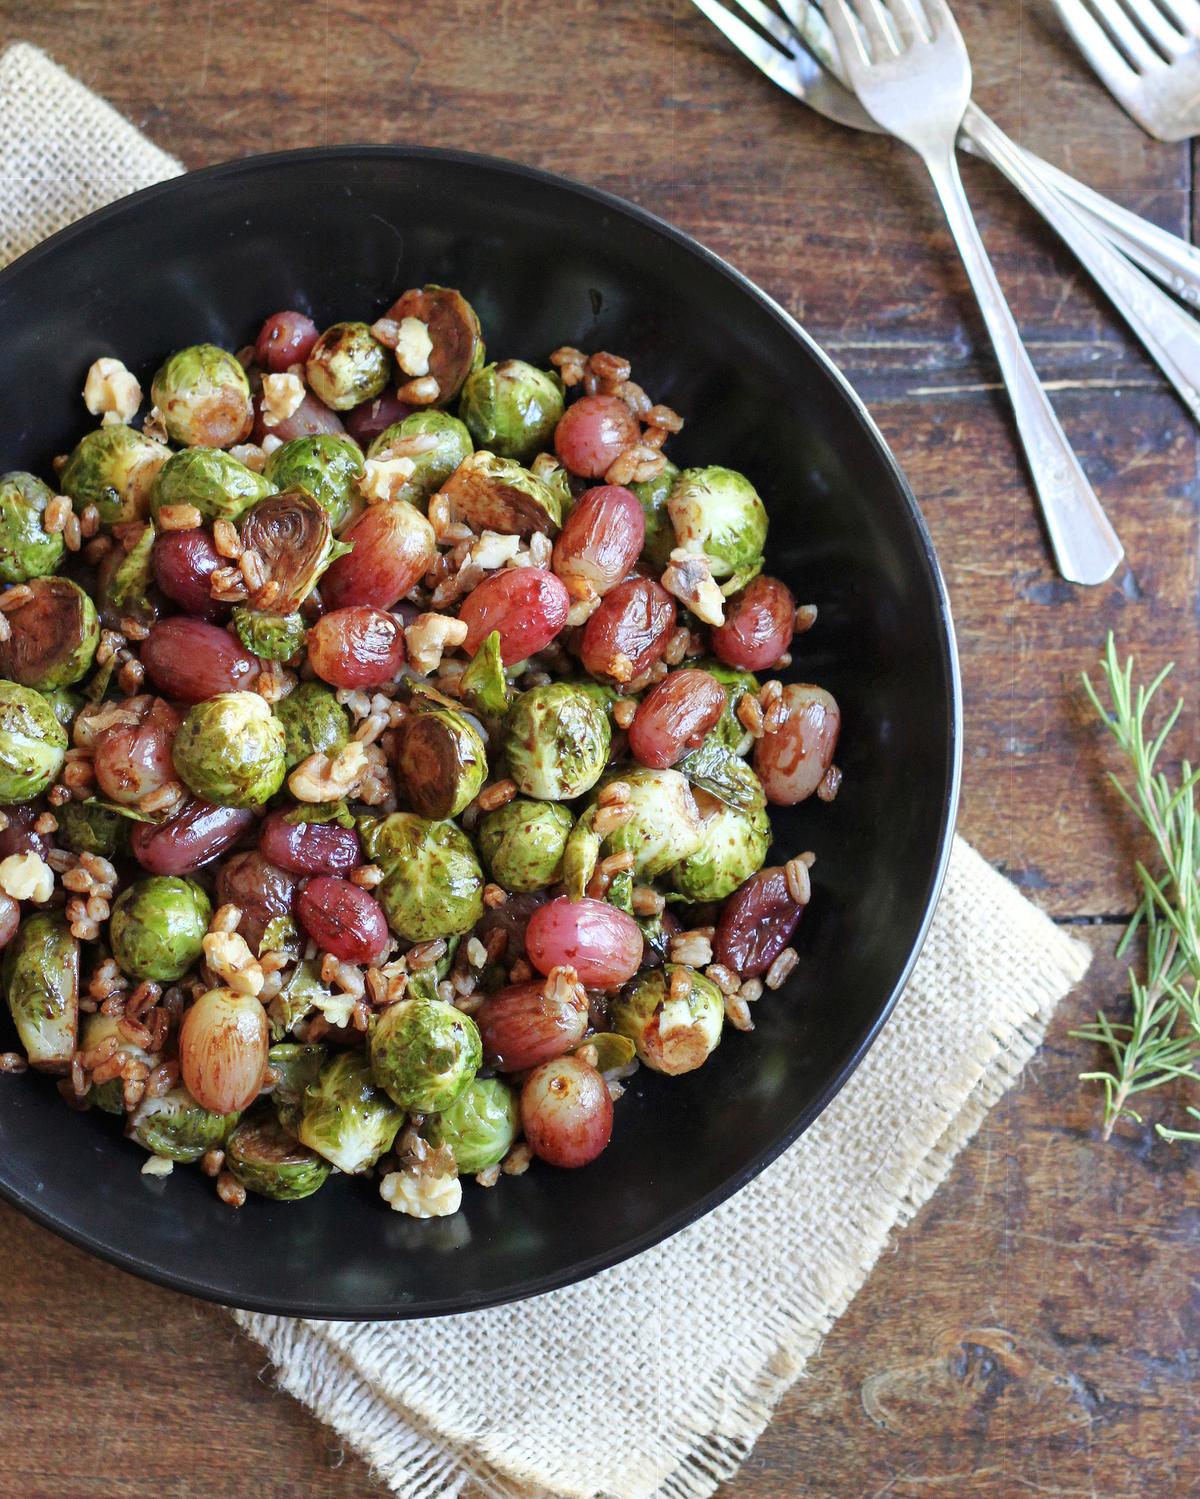 This hearty bowl tosses Brussels sprouts with grapes, toasted walnuts, and a cooked grain. (Lynda Balslev for Tastefood)